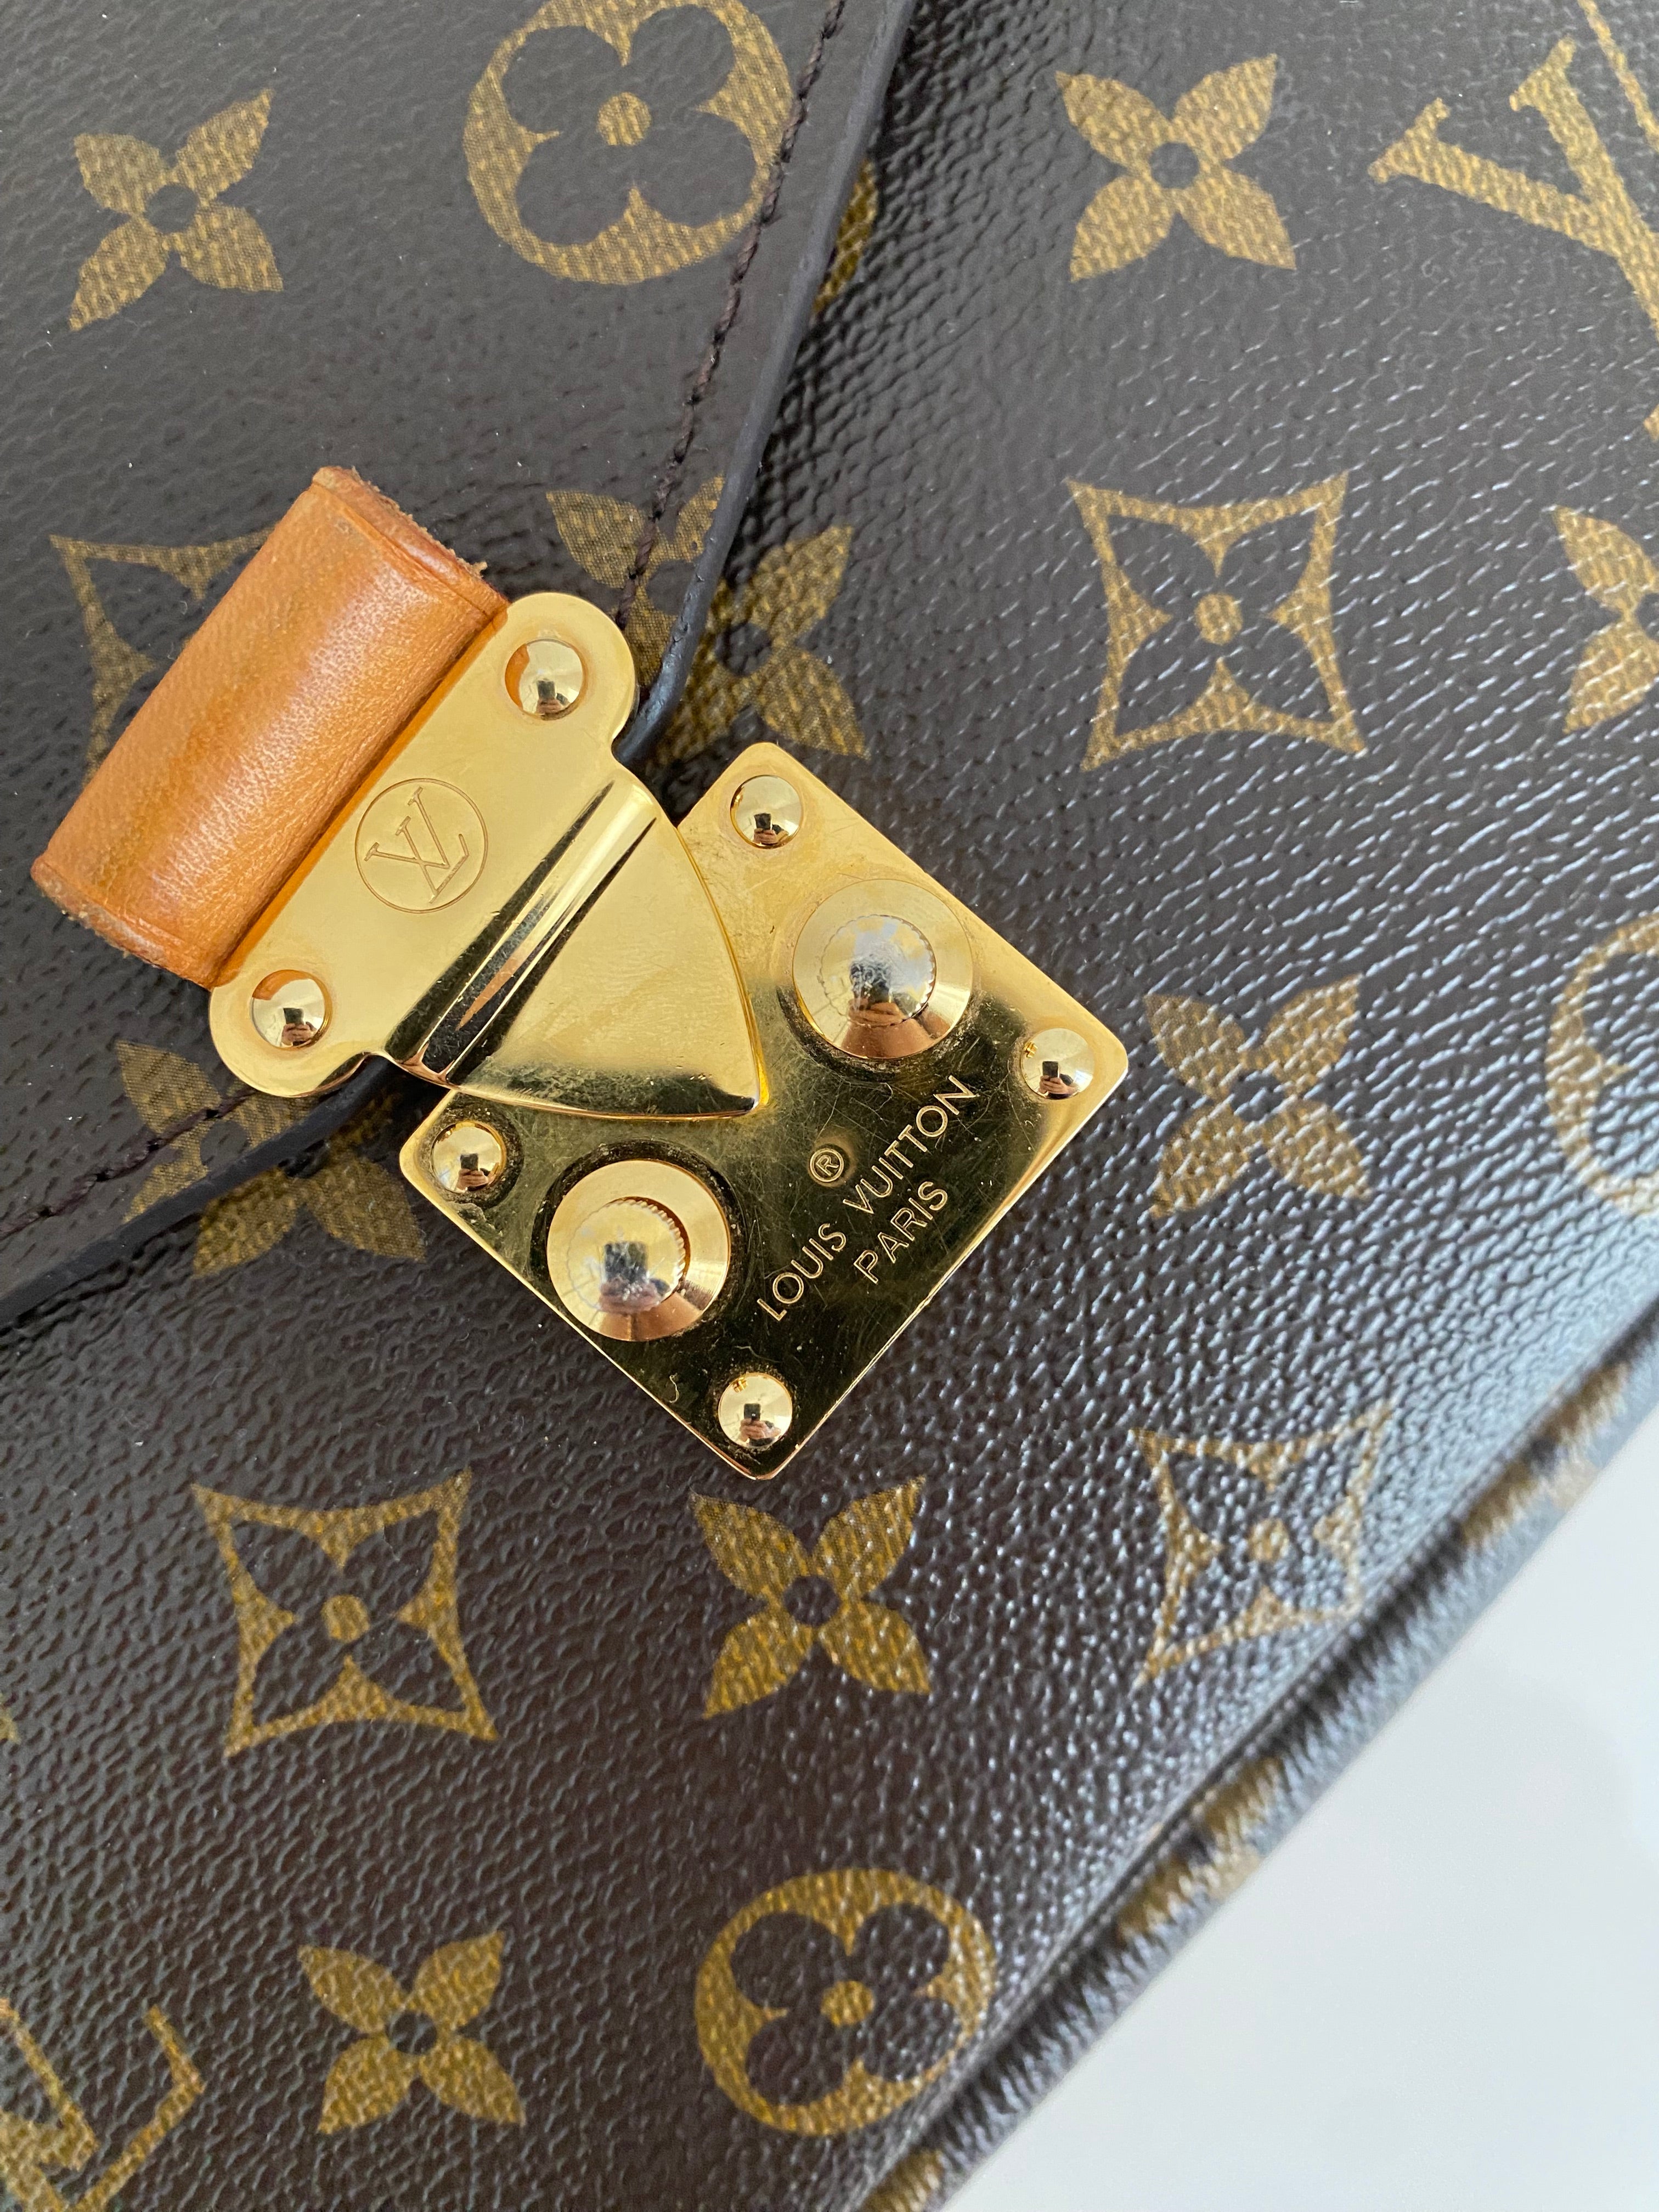 Coveted luxury essentials  Louis vuitton, Bag sale, Bags